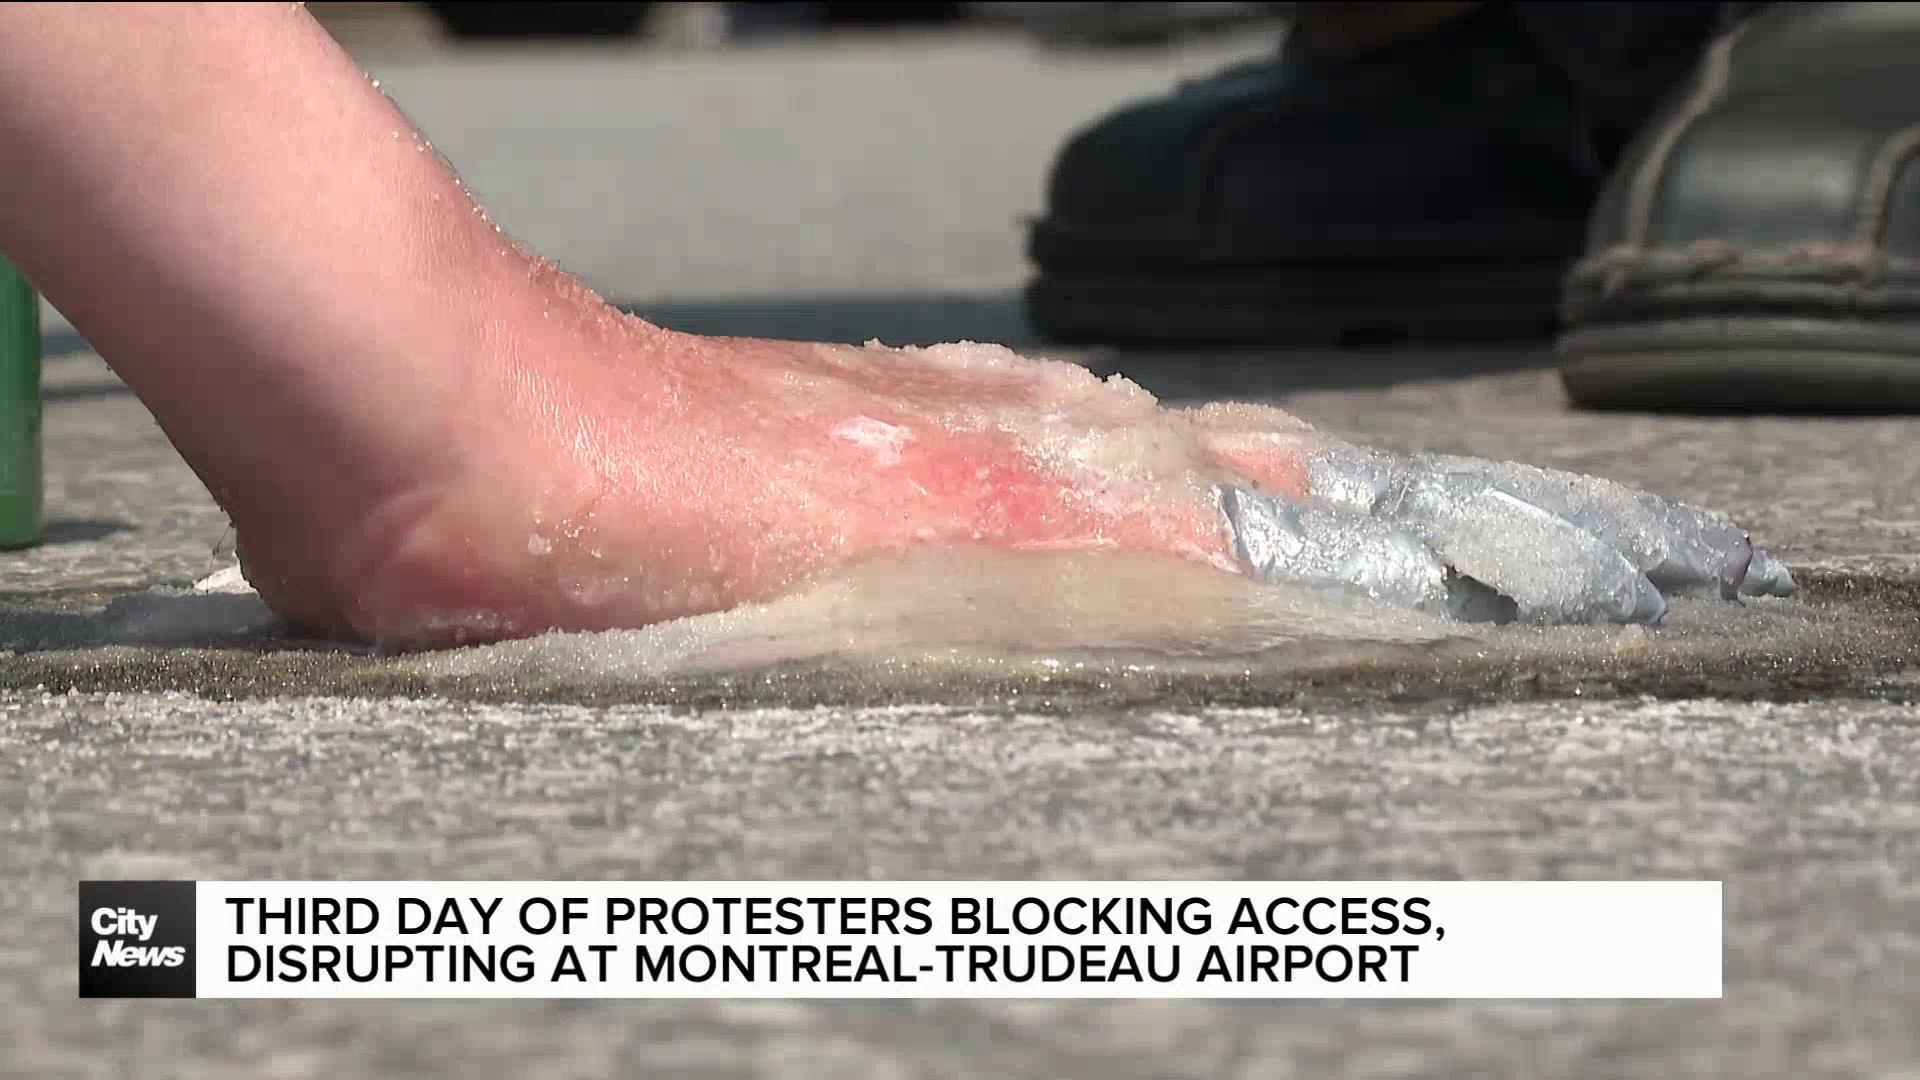 Third day of disruption at Montreal-Trudeau airport